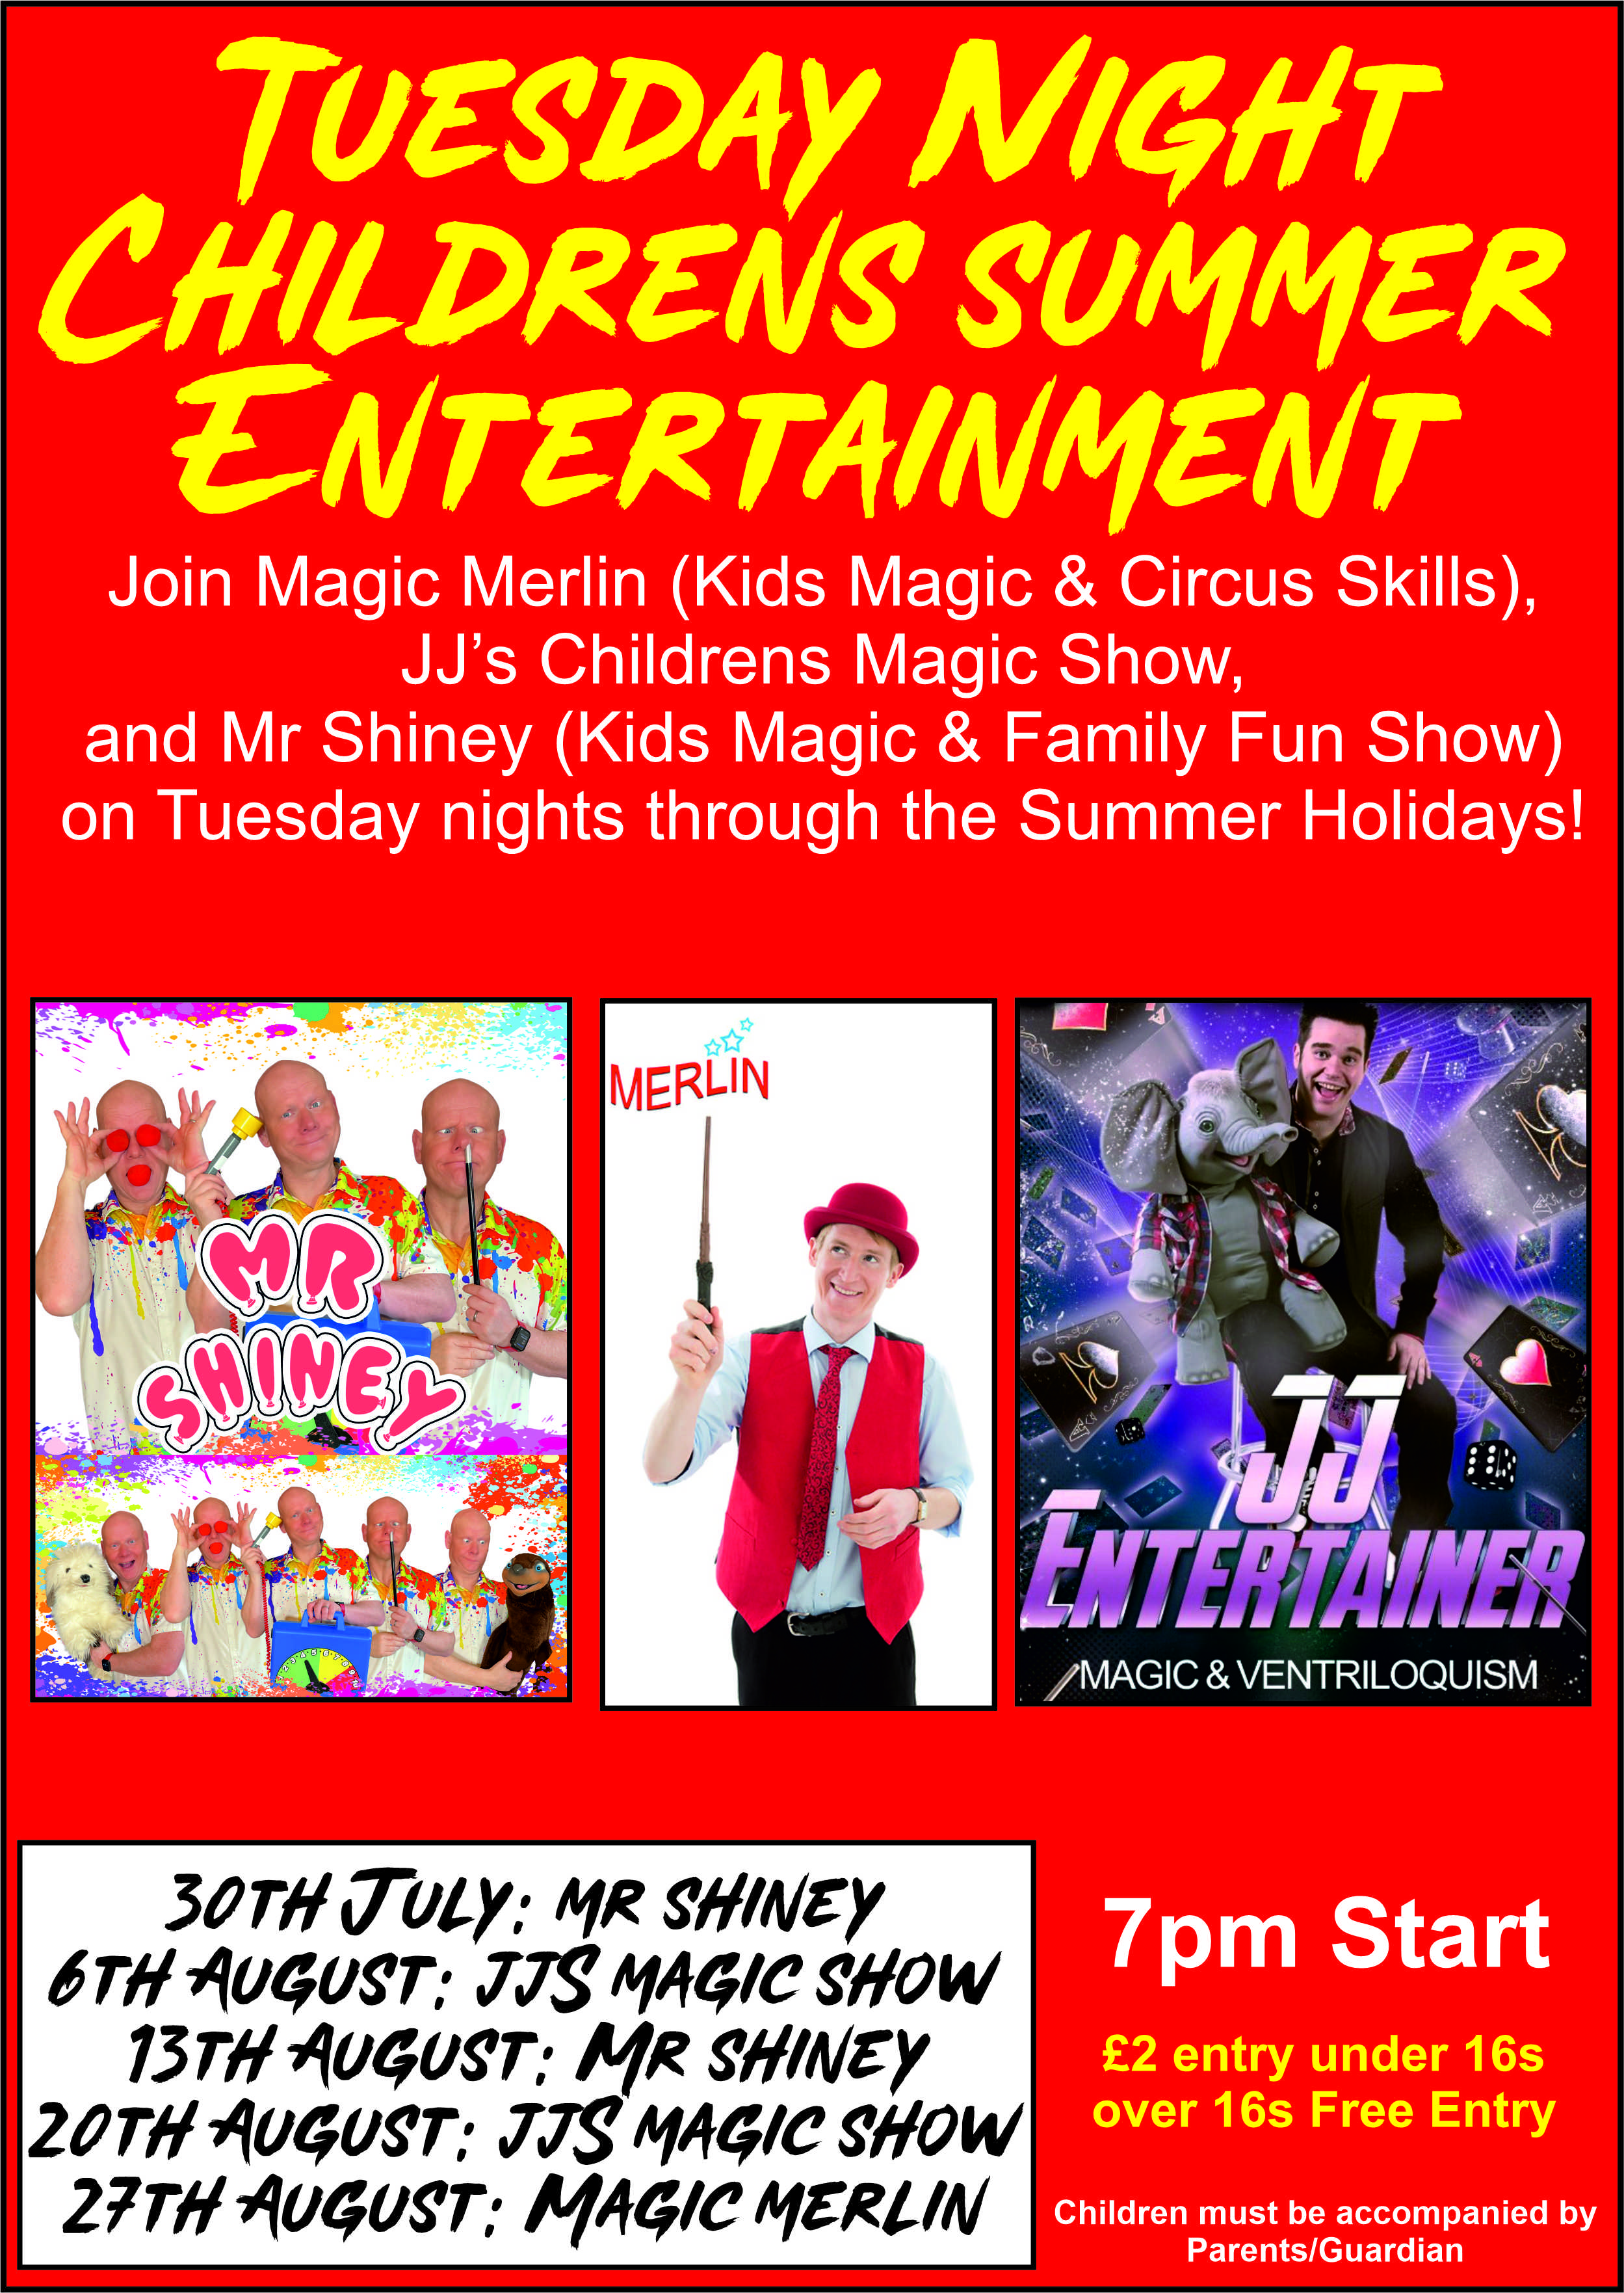 Childrens Entertainment with Mr Shiney